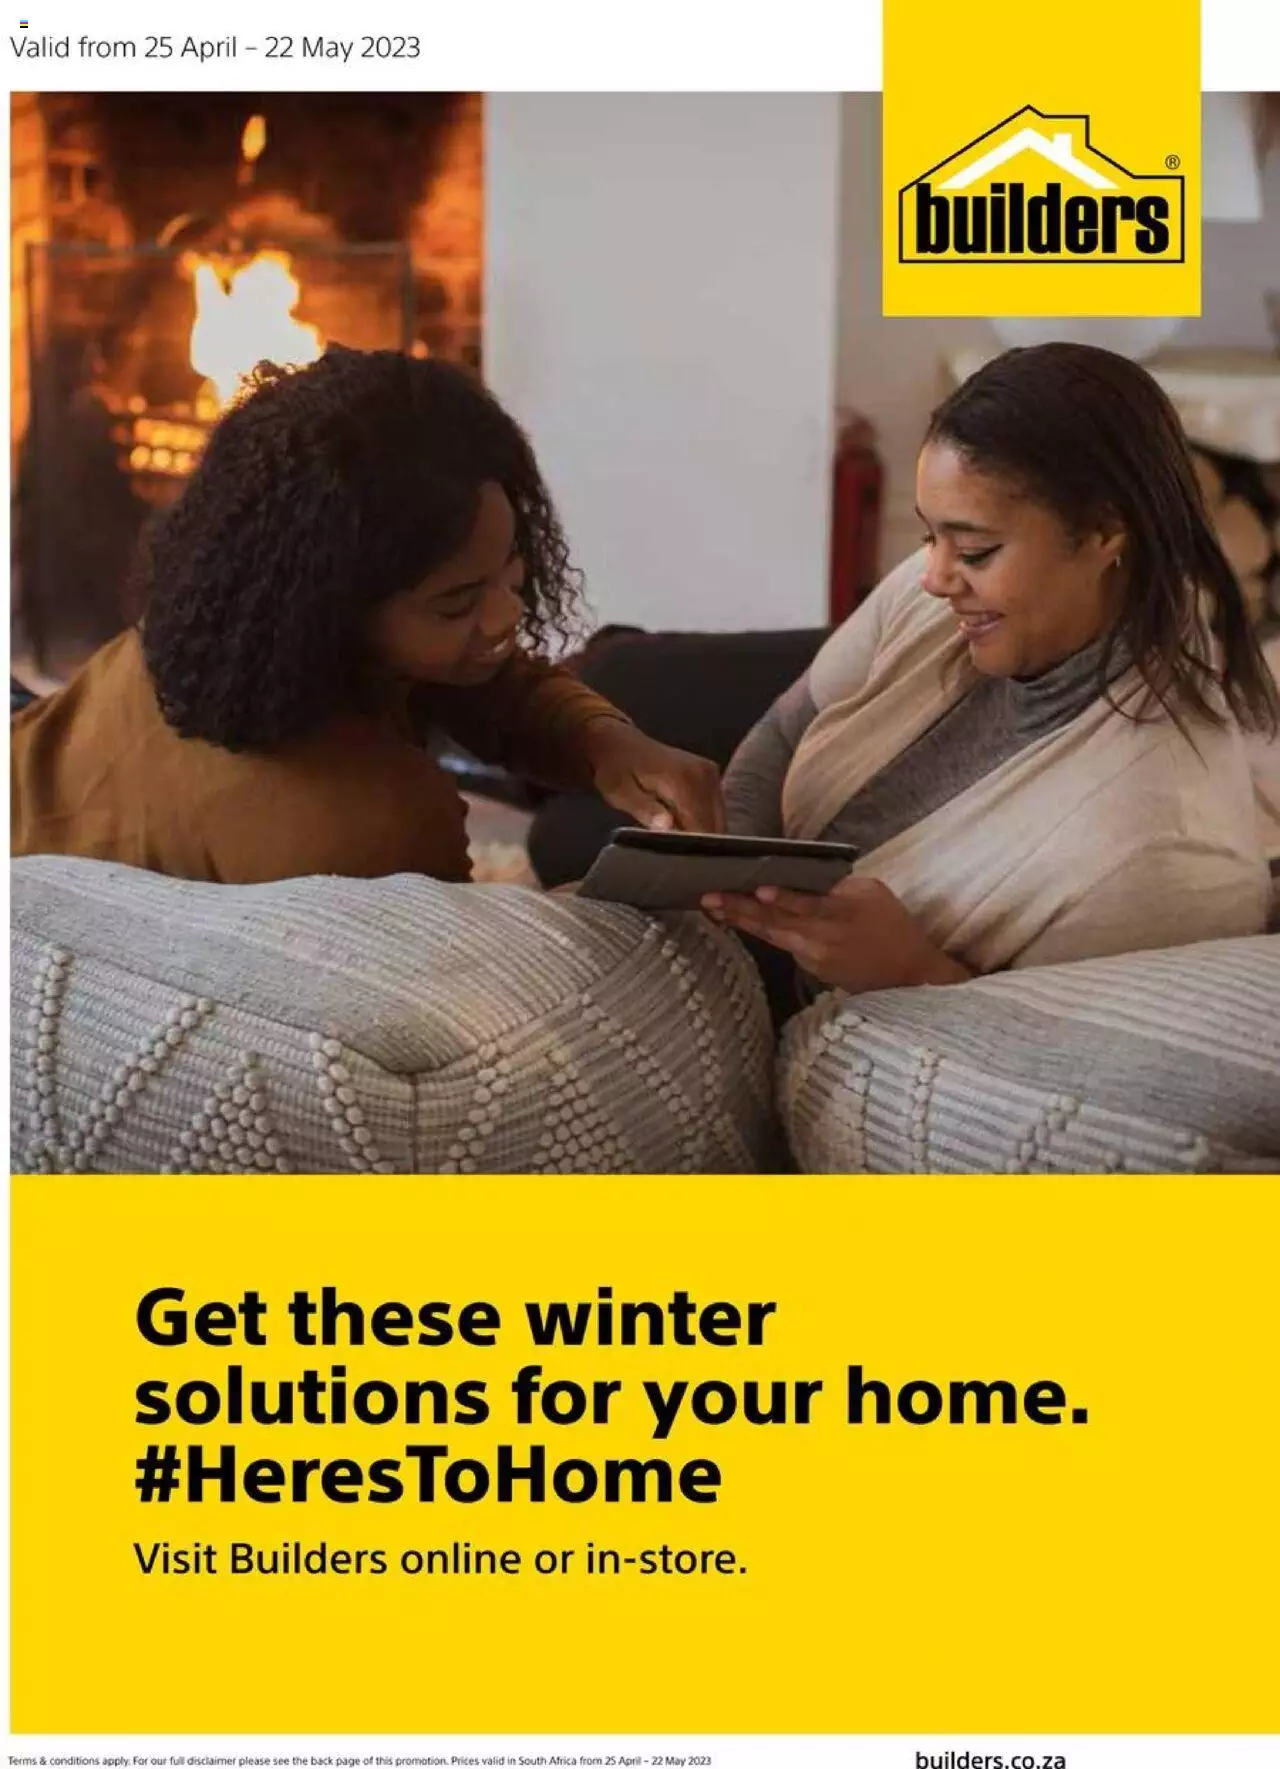 Builders Warehouse Specials Winter Solutions 25 Apr – 22 May 2023